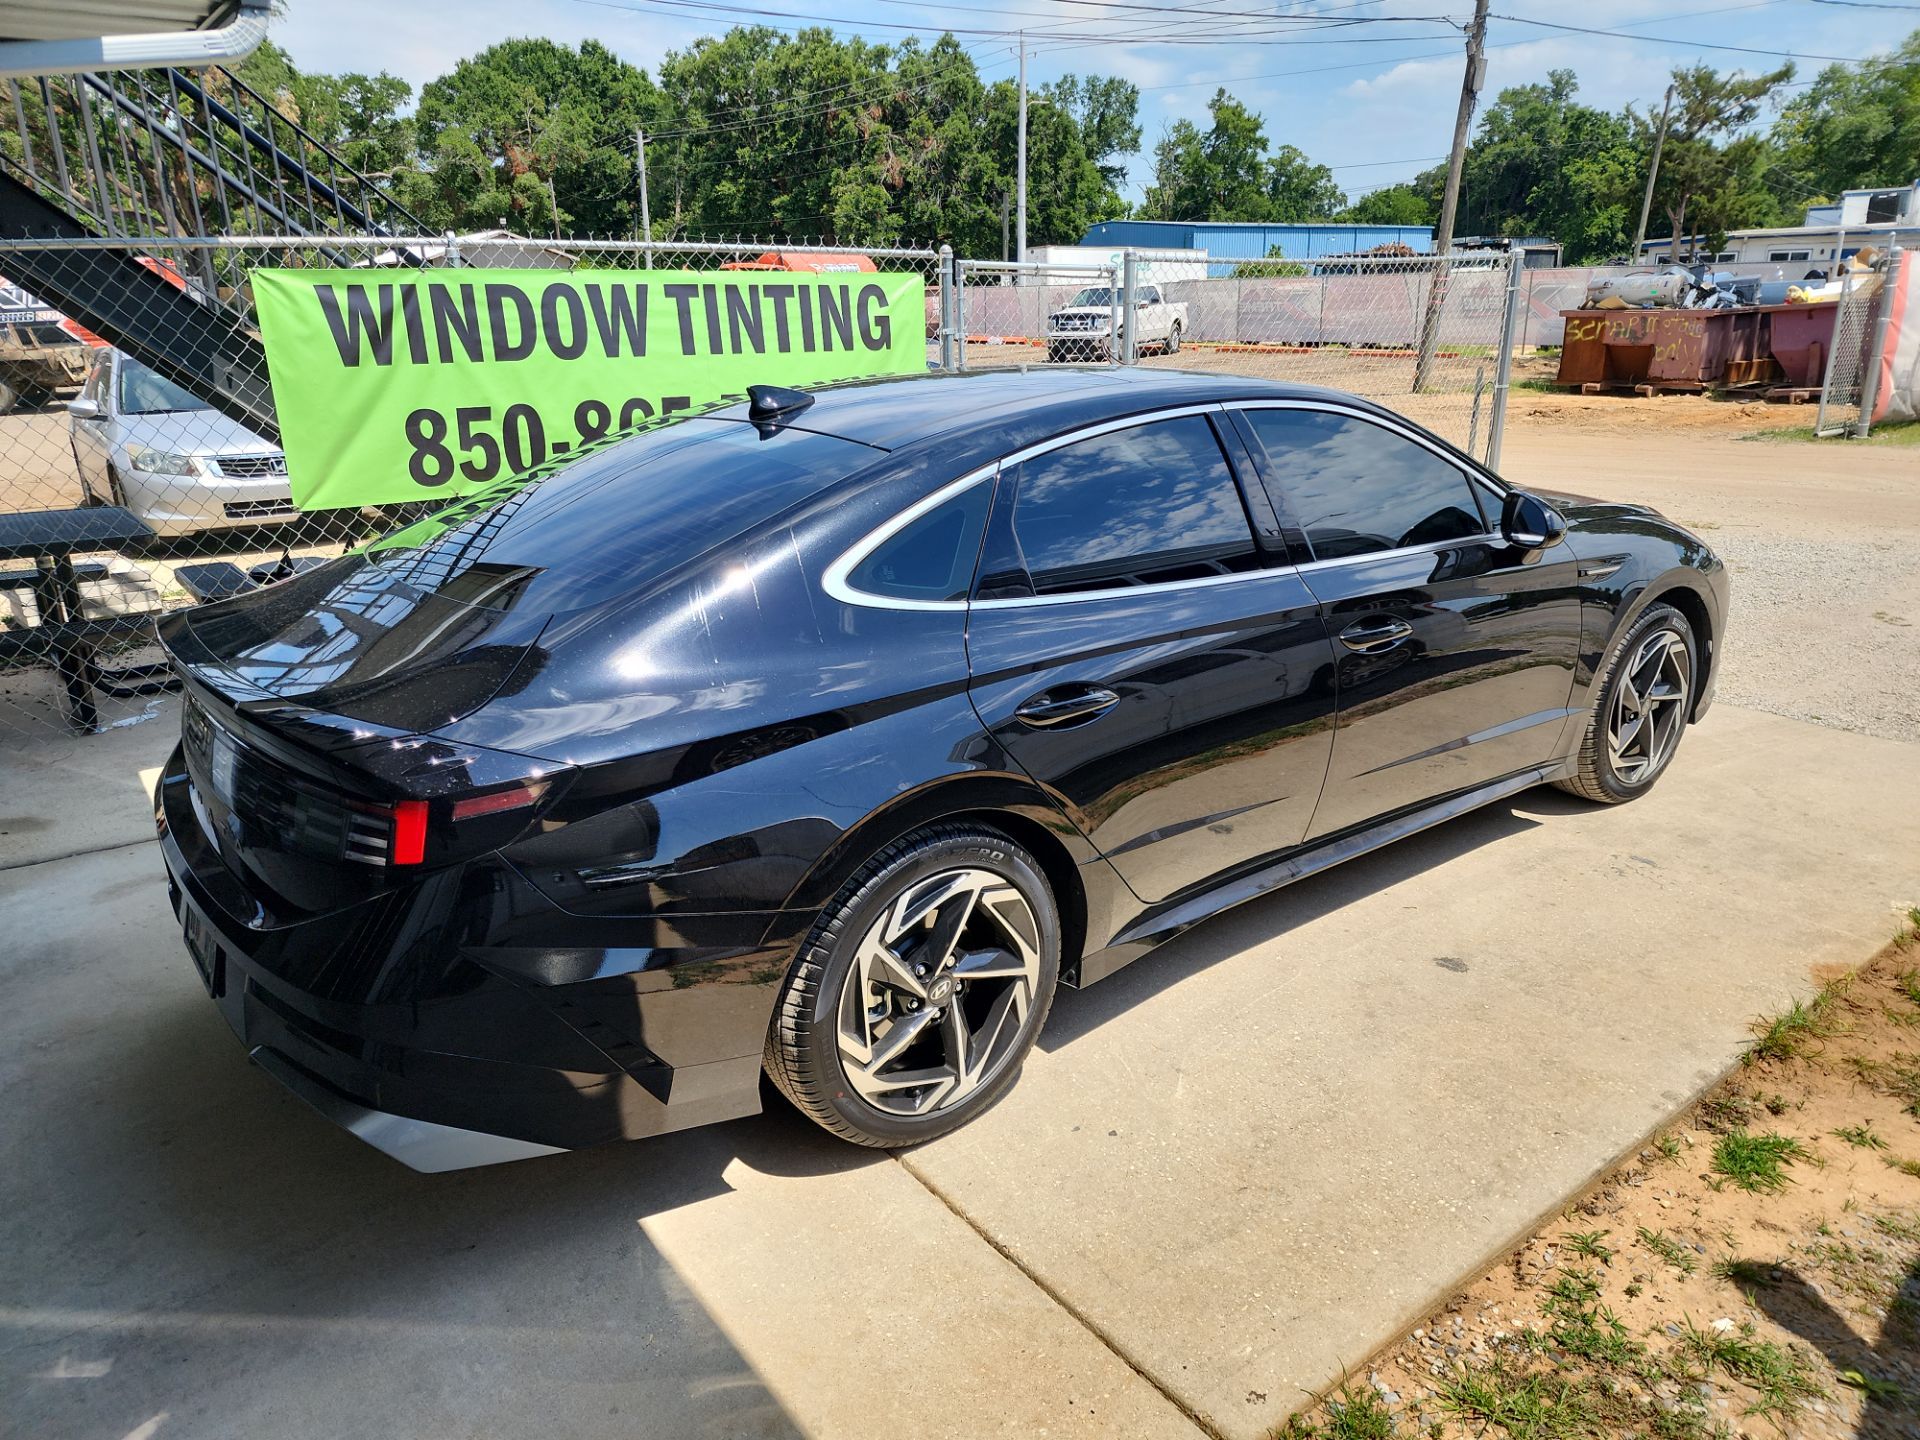 the car shown in the photo is parked outside a business that specializes in window tinting the photo features a black sedan with freshly applied window tints on all side windows and the rear window the tinting service provides added privacy and uv protection for the vehicle's passengers and interior the car appears to be in a lot designated for customers awaiting or having completed the tinting service